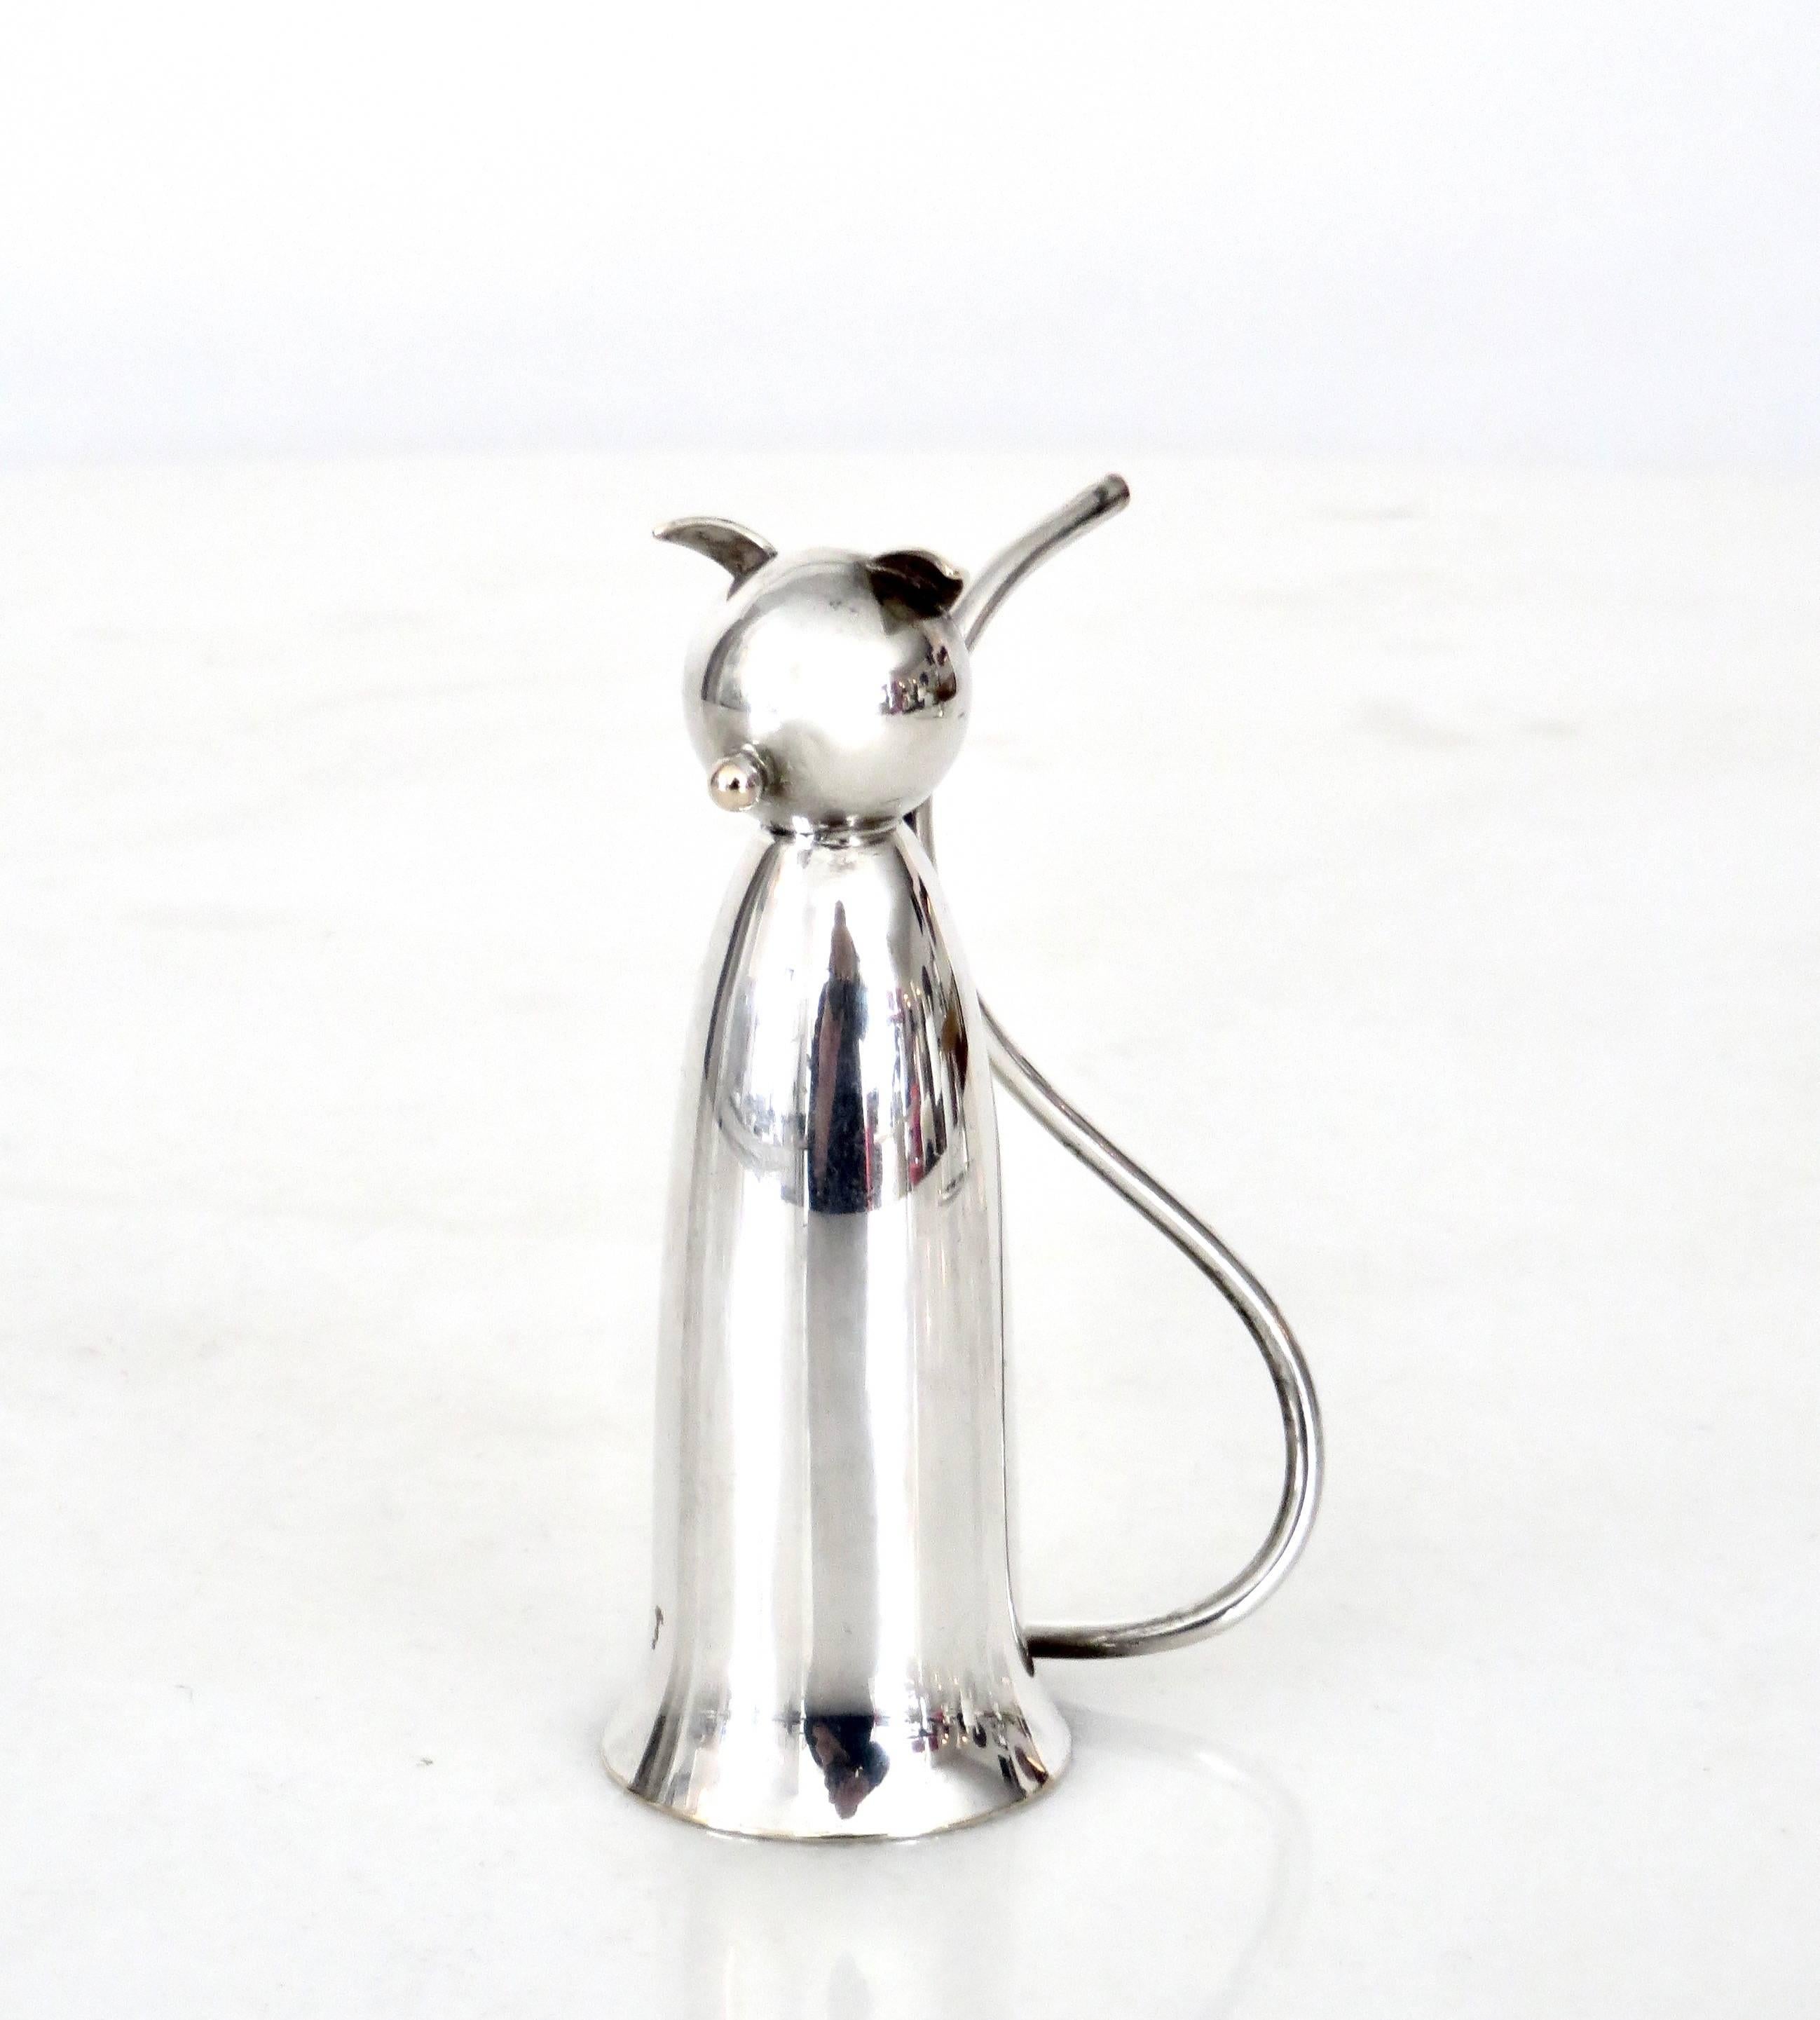 A Napier silver plate liquor measuring jigger in the form of a very cute cat. 1 oz.